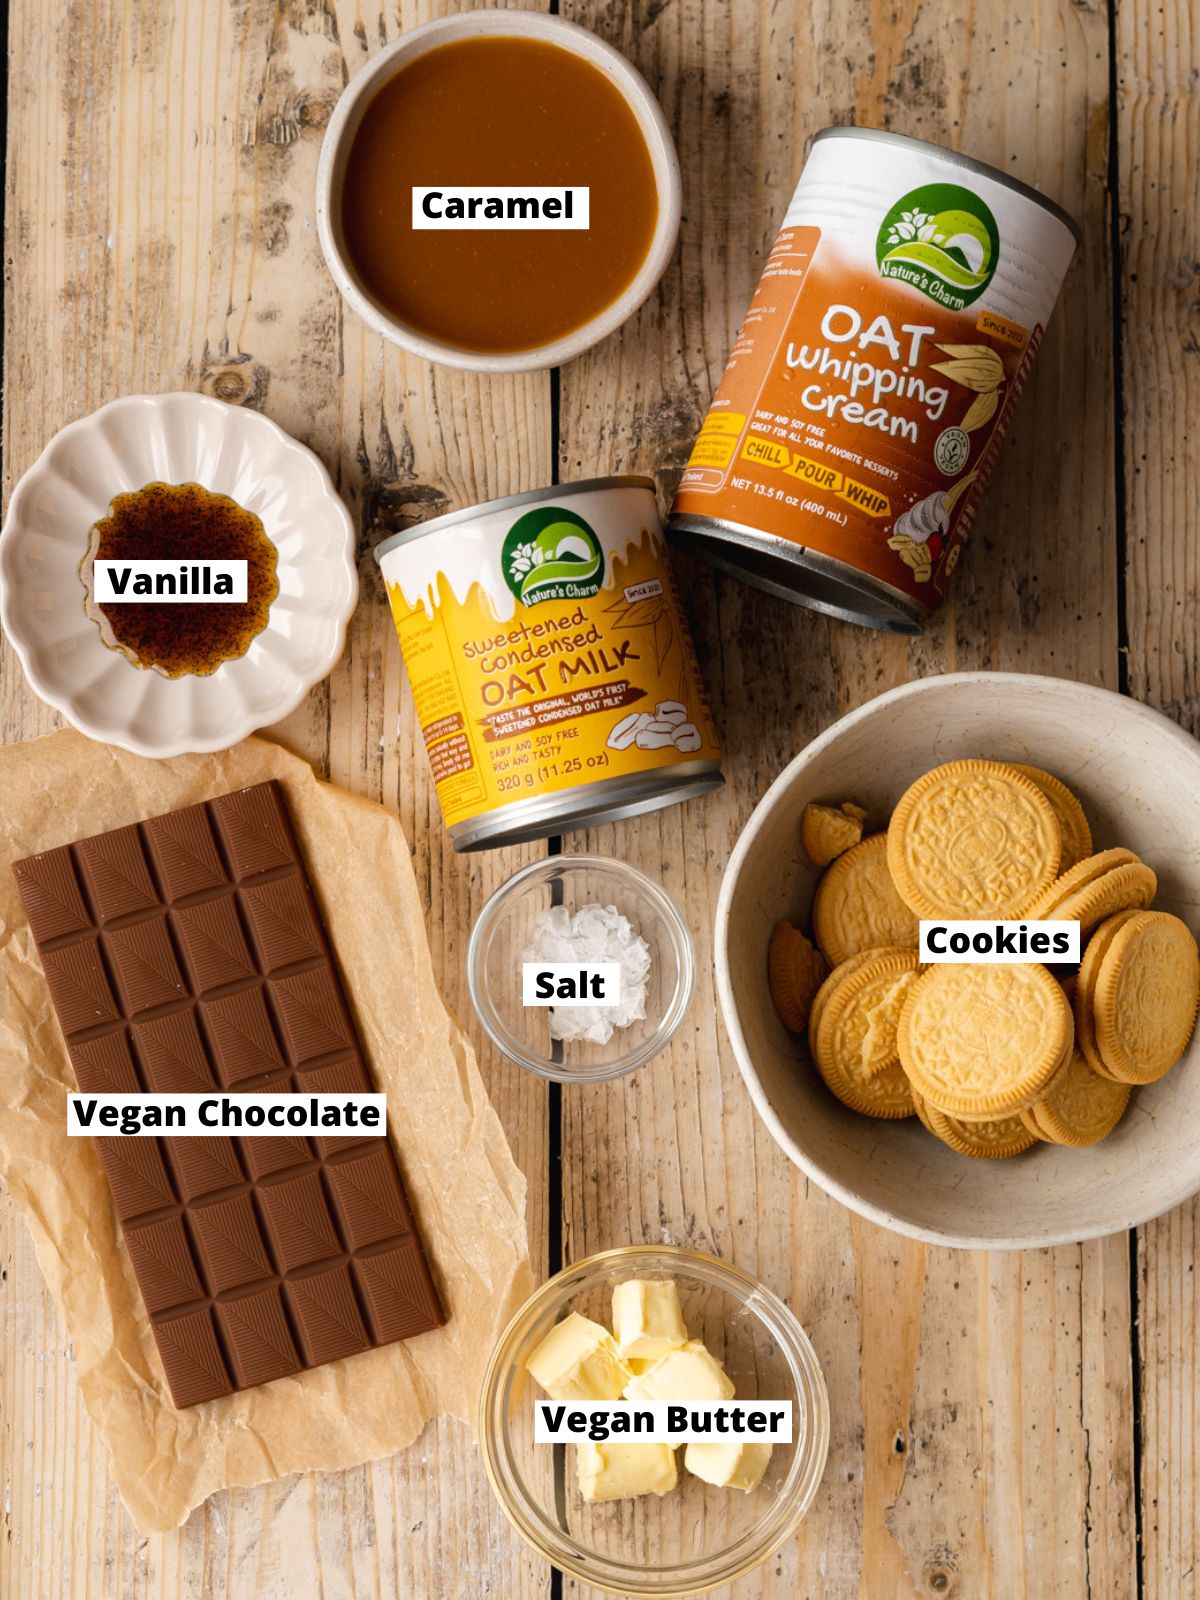 ingredients to make vegan twix ice cream bars measured out in bowls on a light wooden surface.